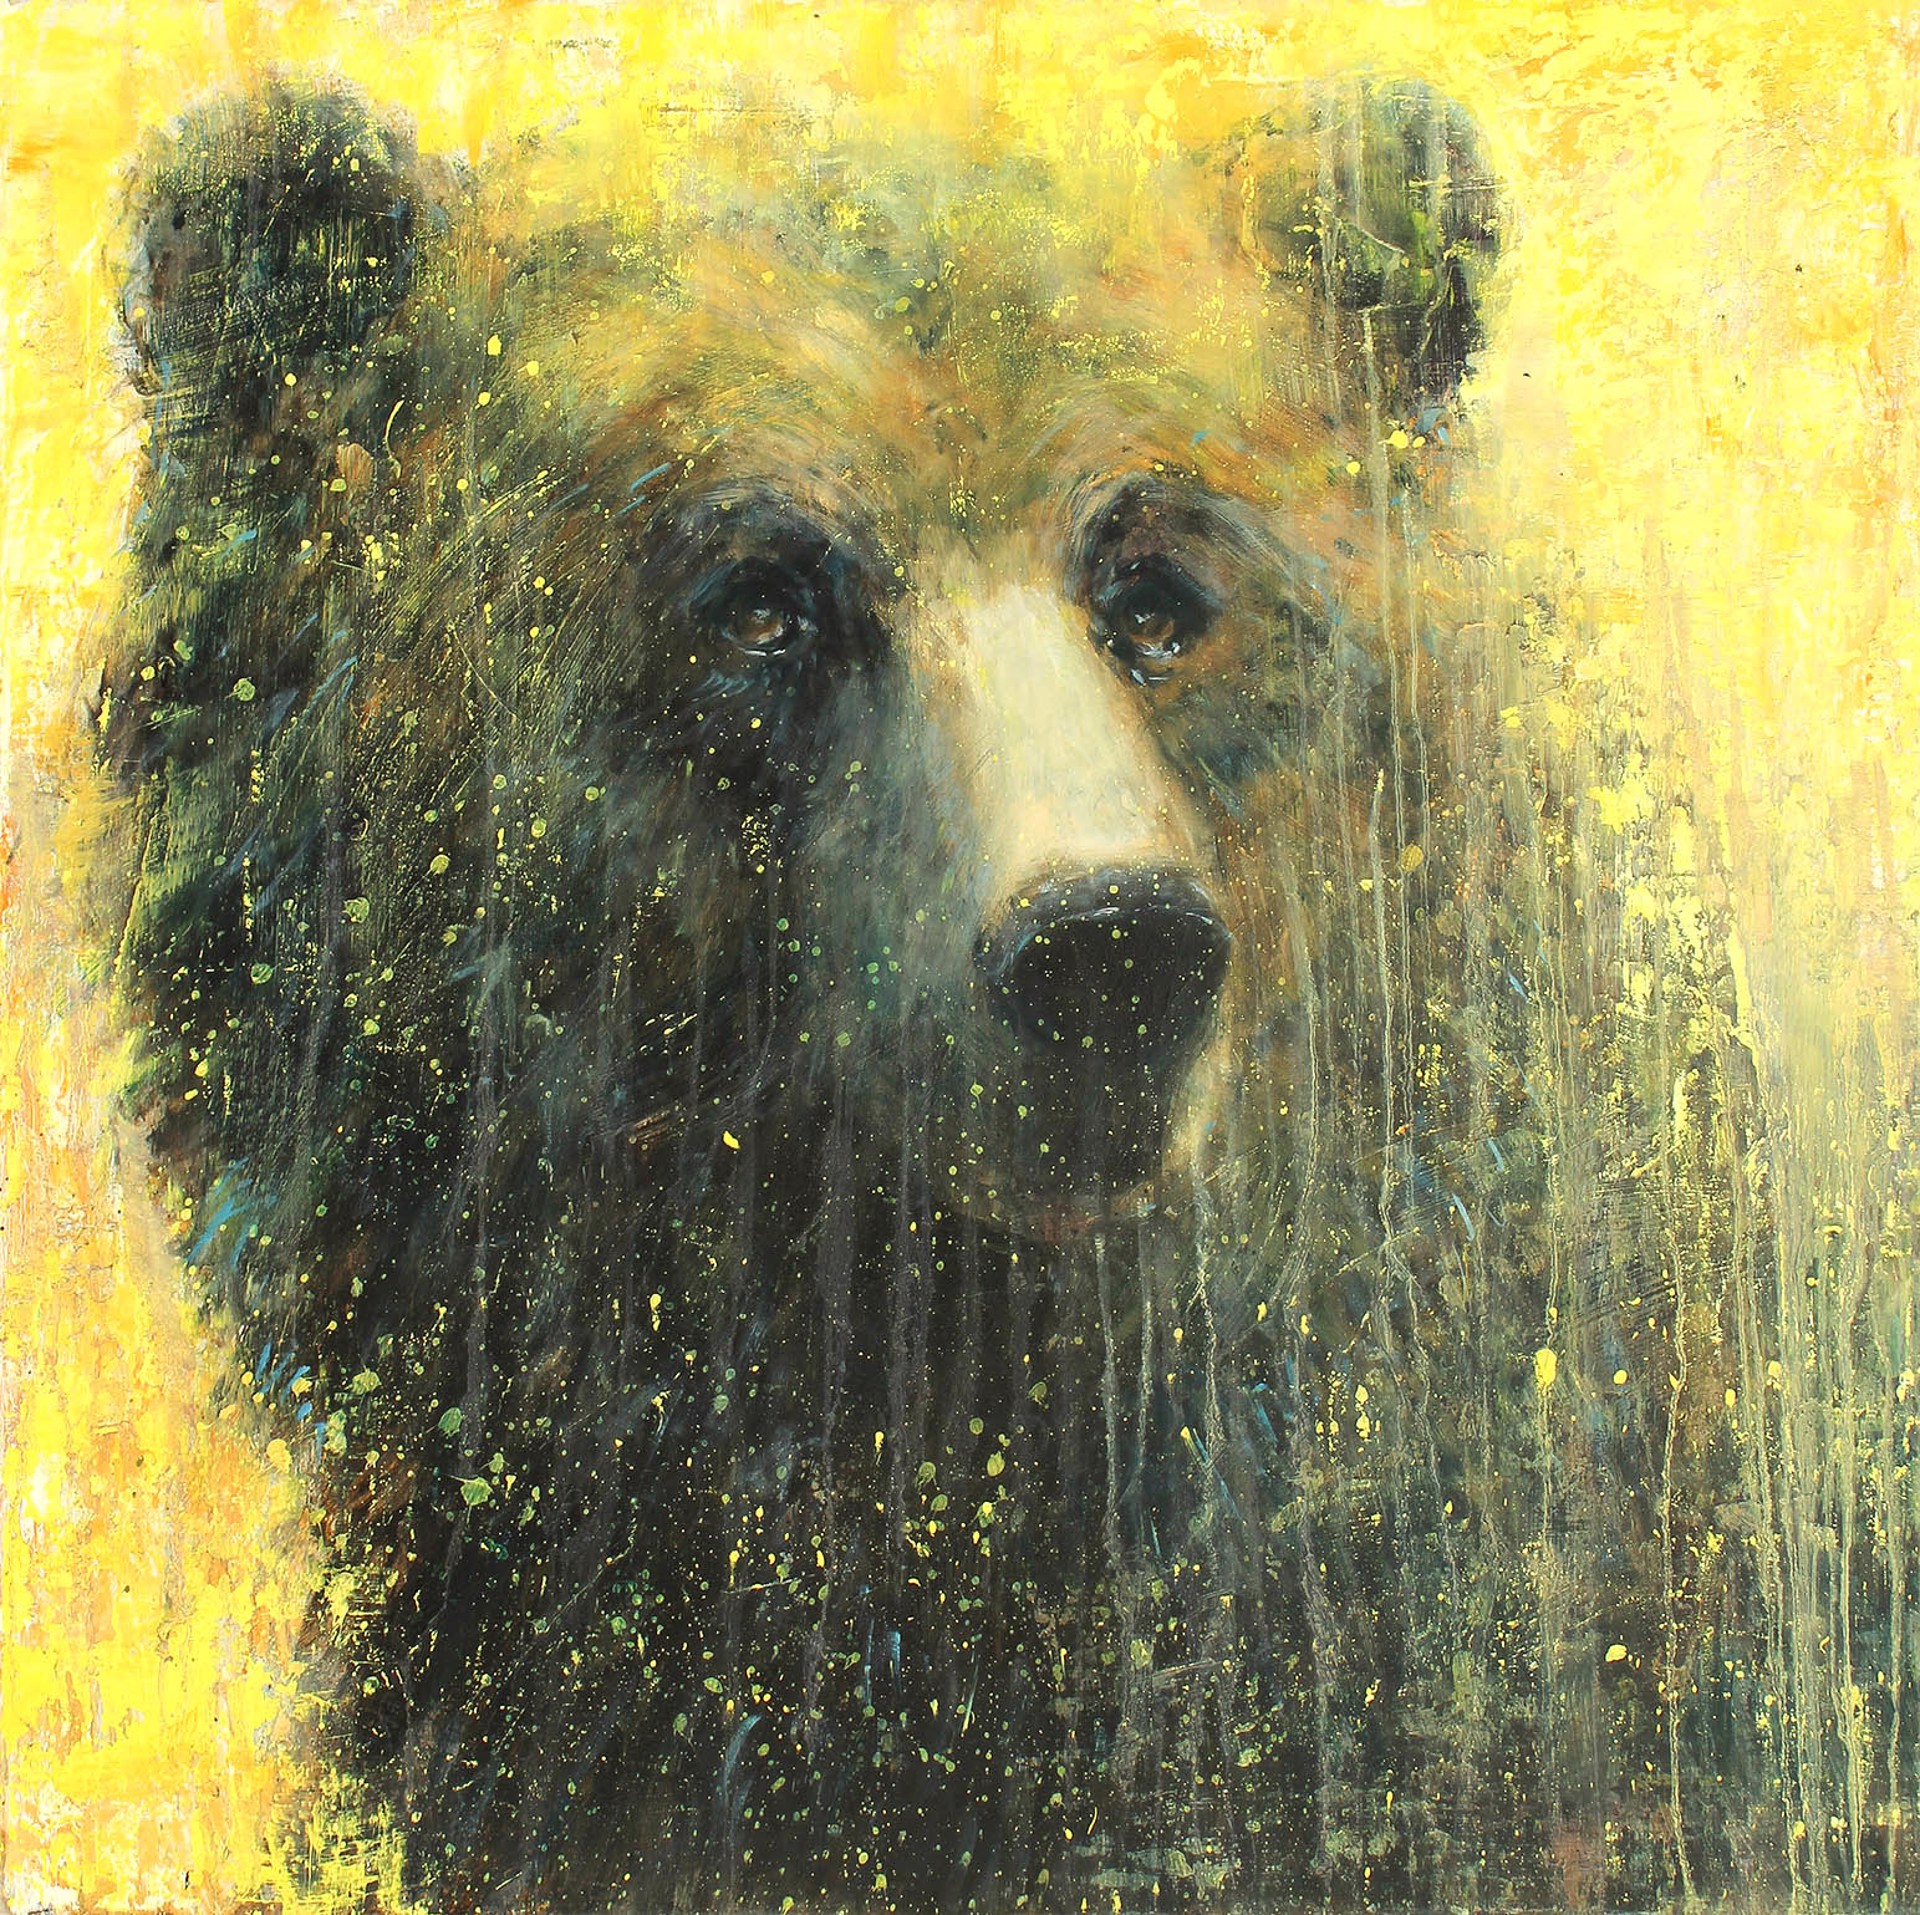 Original Mixed Media Painting Featuring a Grizzly Bear Over Abstract Yellow Background With Dripping Details